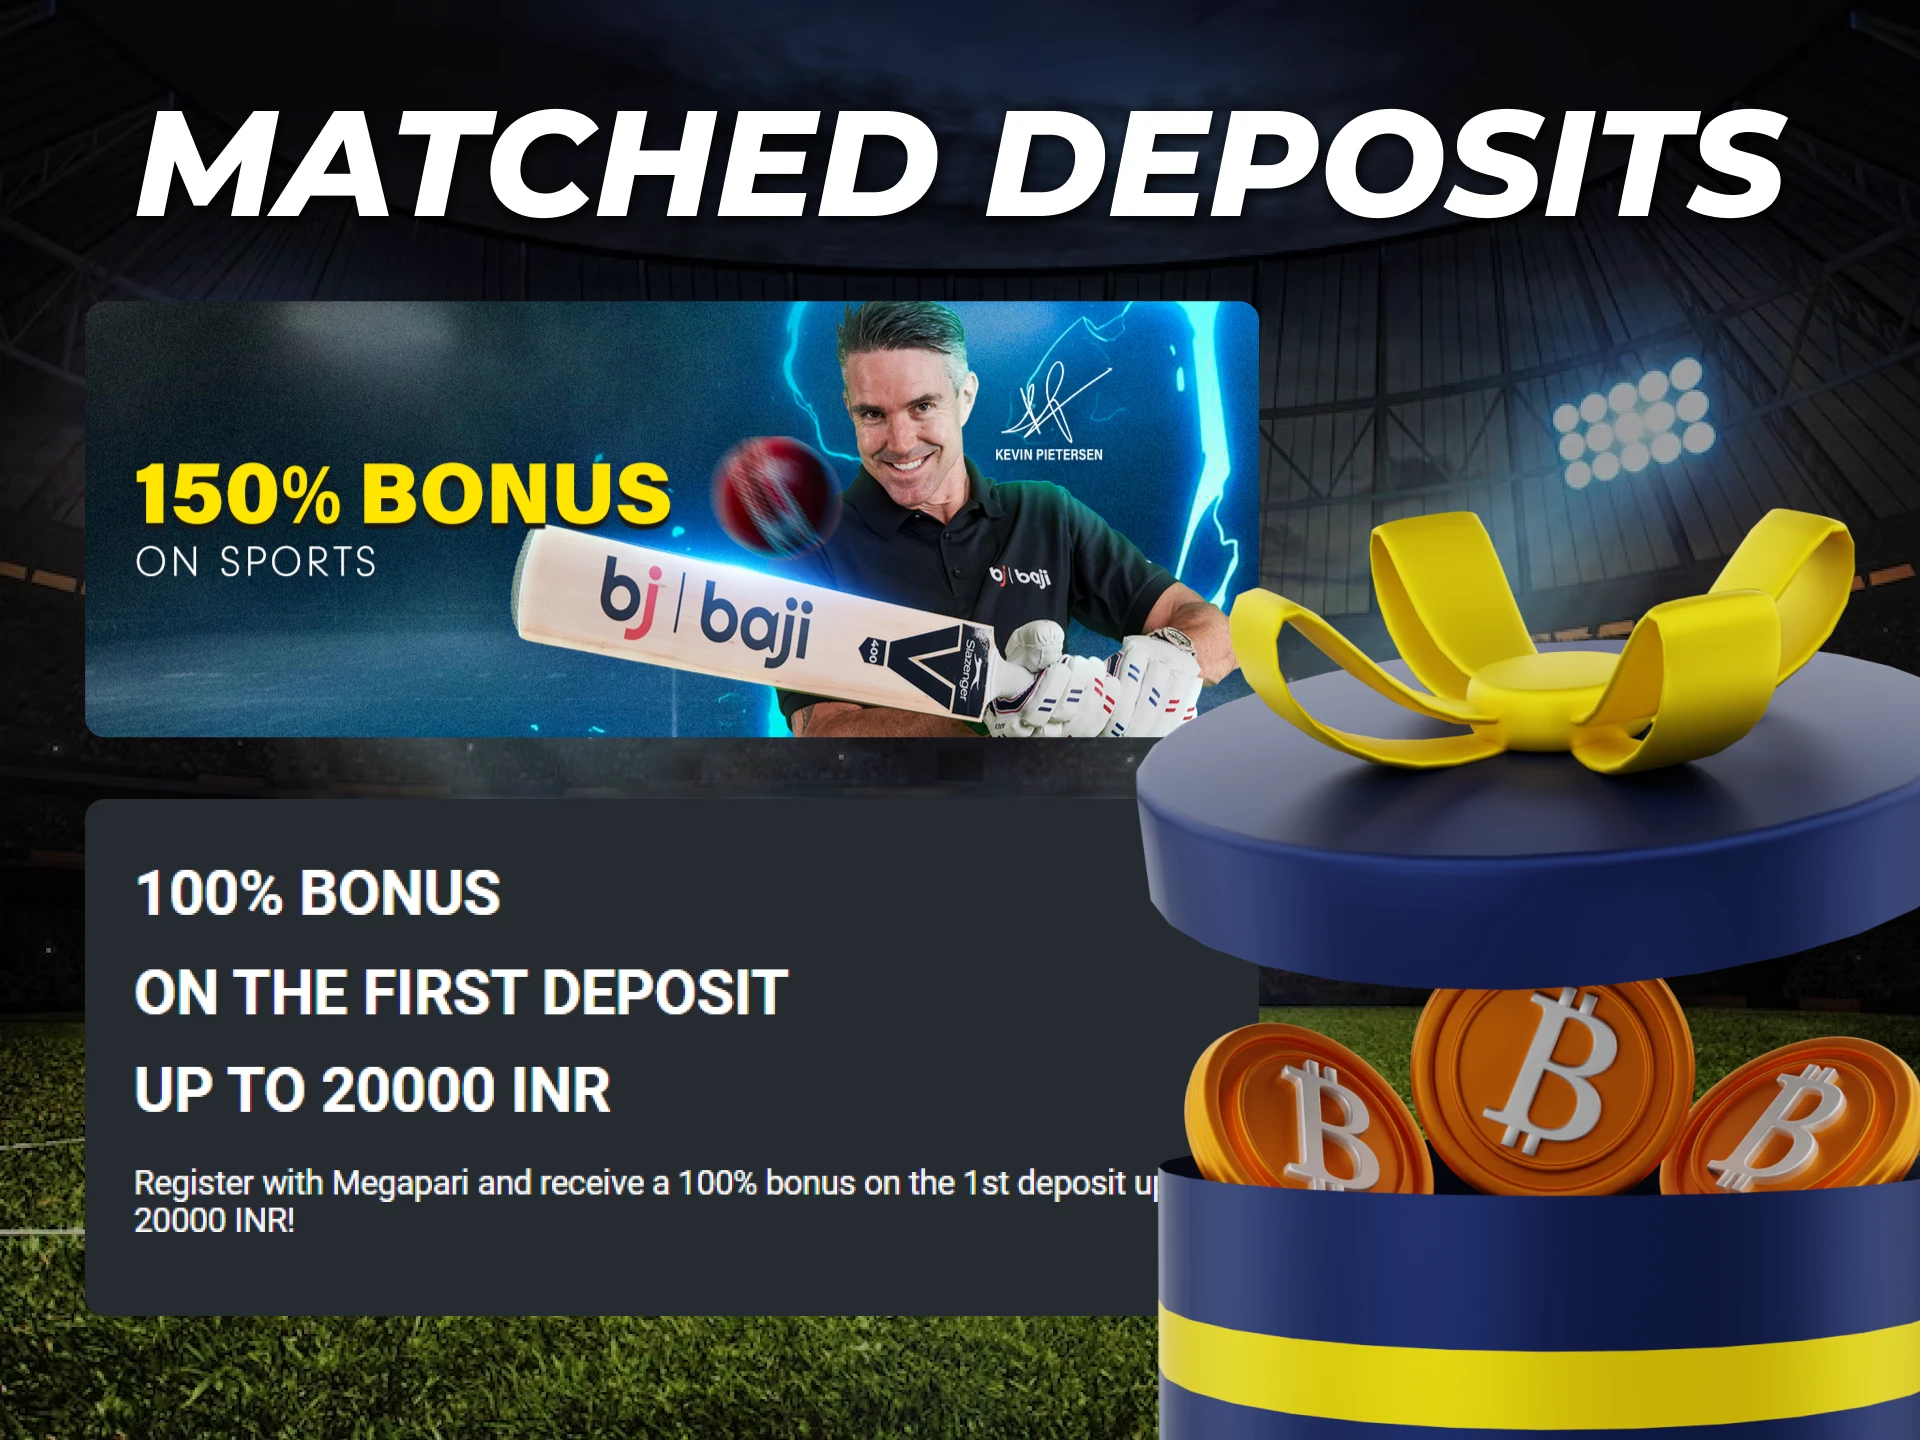 Make a deposit at these crypto betting sites and get a nice matched deposit bonus.